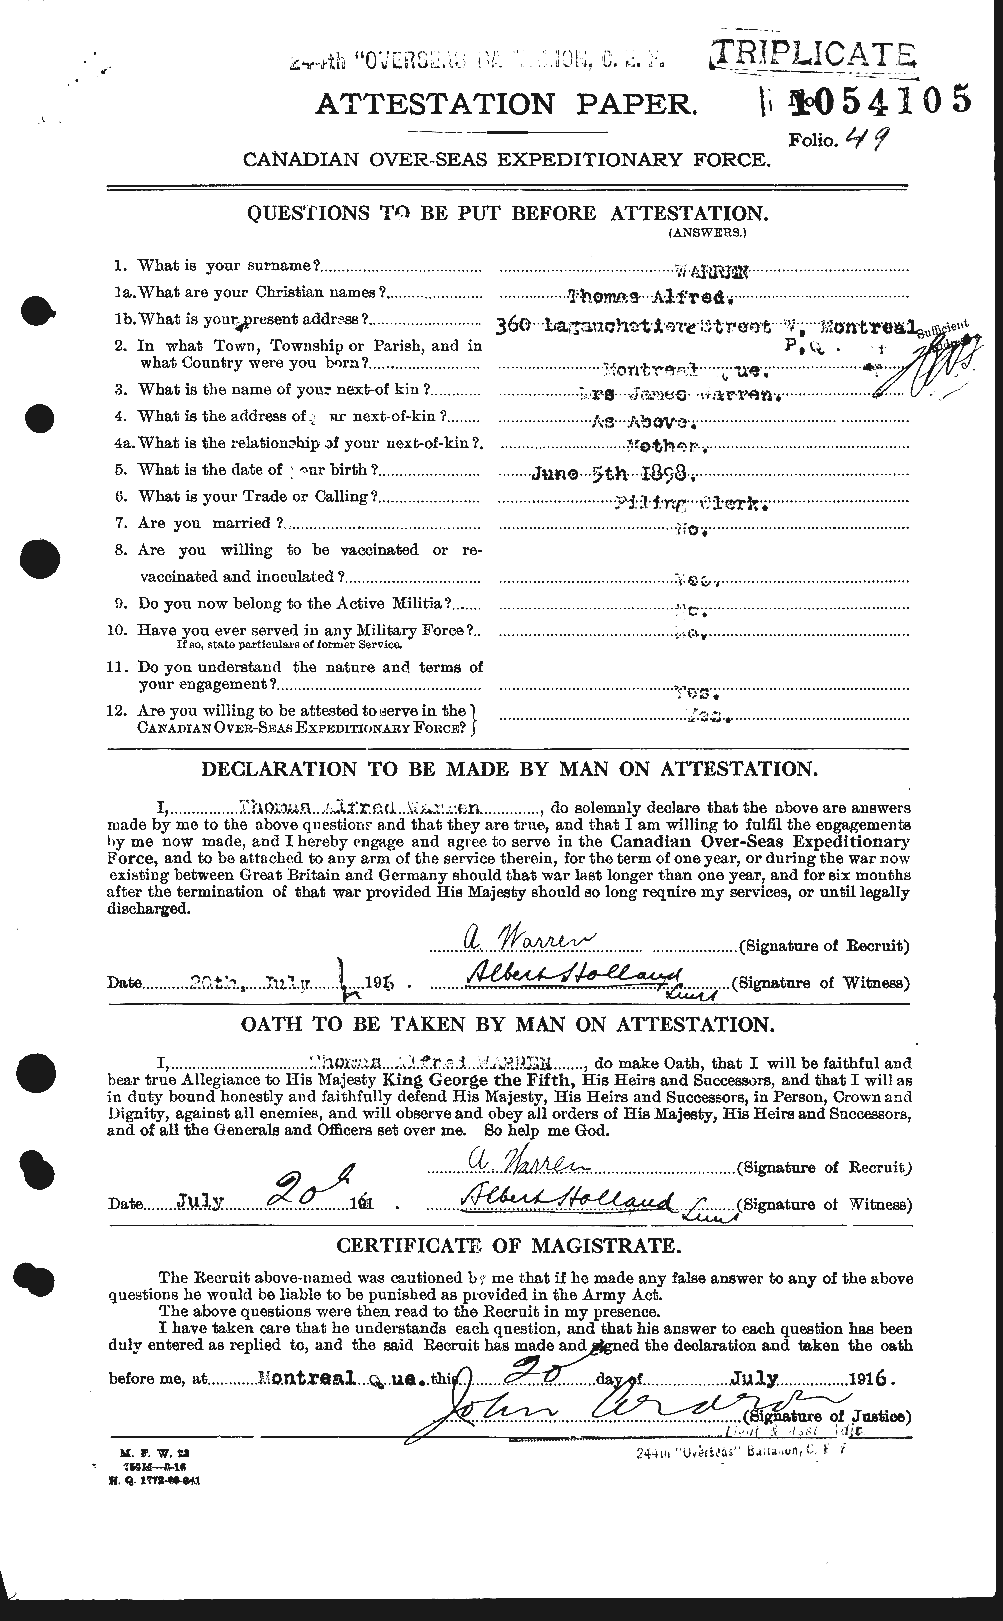 Personnel Records of the First World War - CEF 658642a